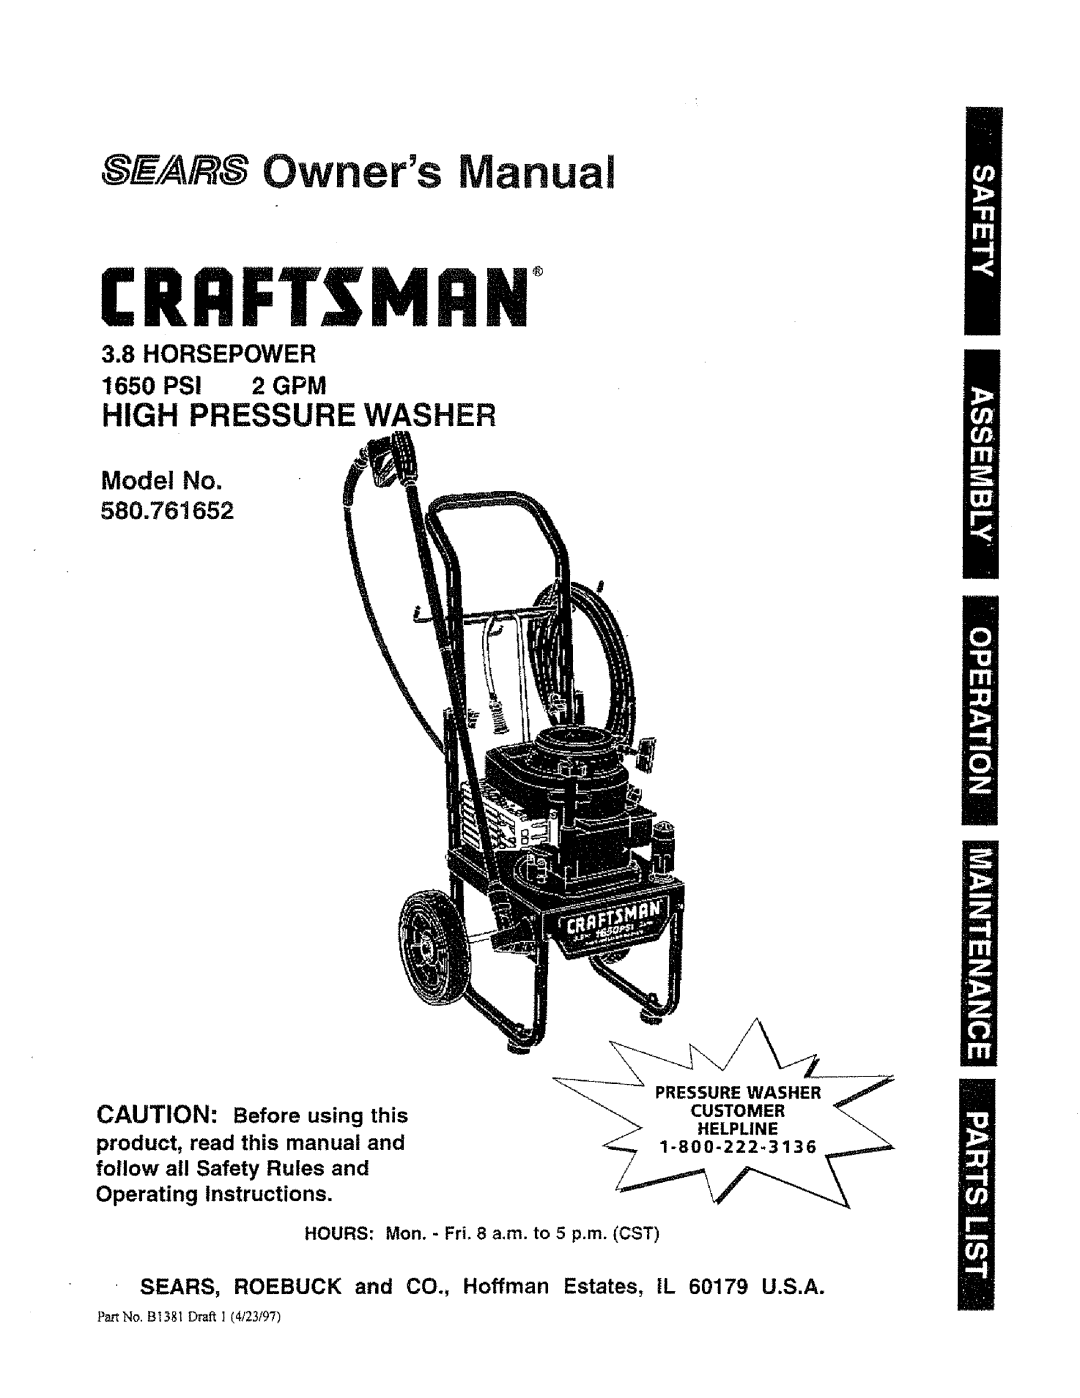 Sears 580.761652 manual Model No, HORSEPOWER 1650 PS! 2 GPM, Craftsman, Owners anual, High Pressure Washer, Before using 